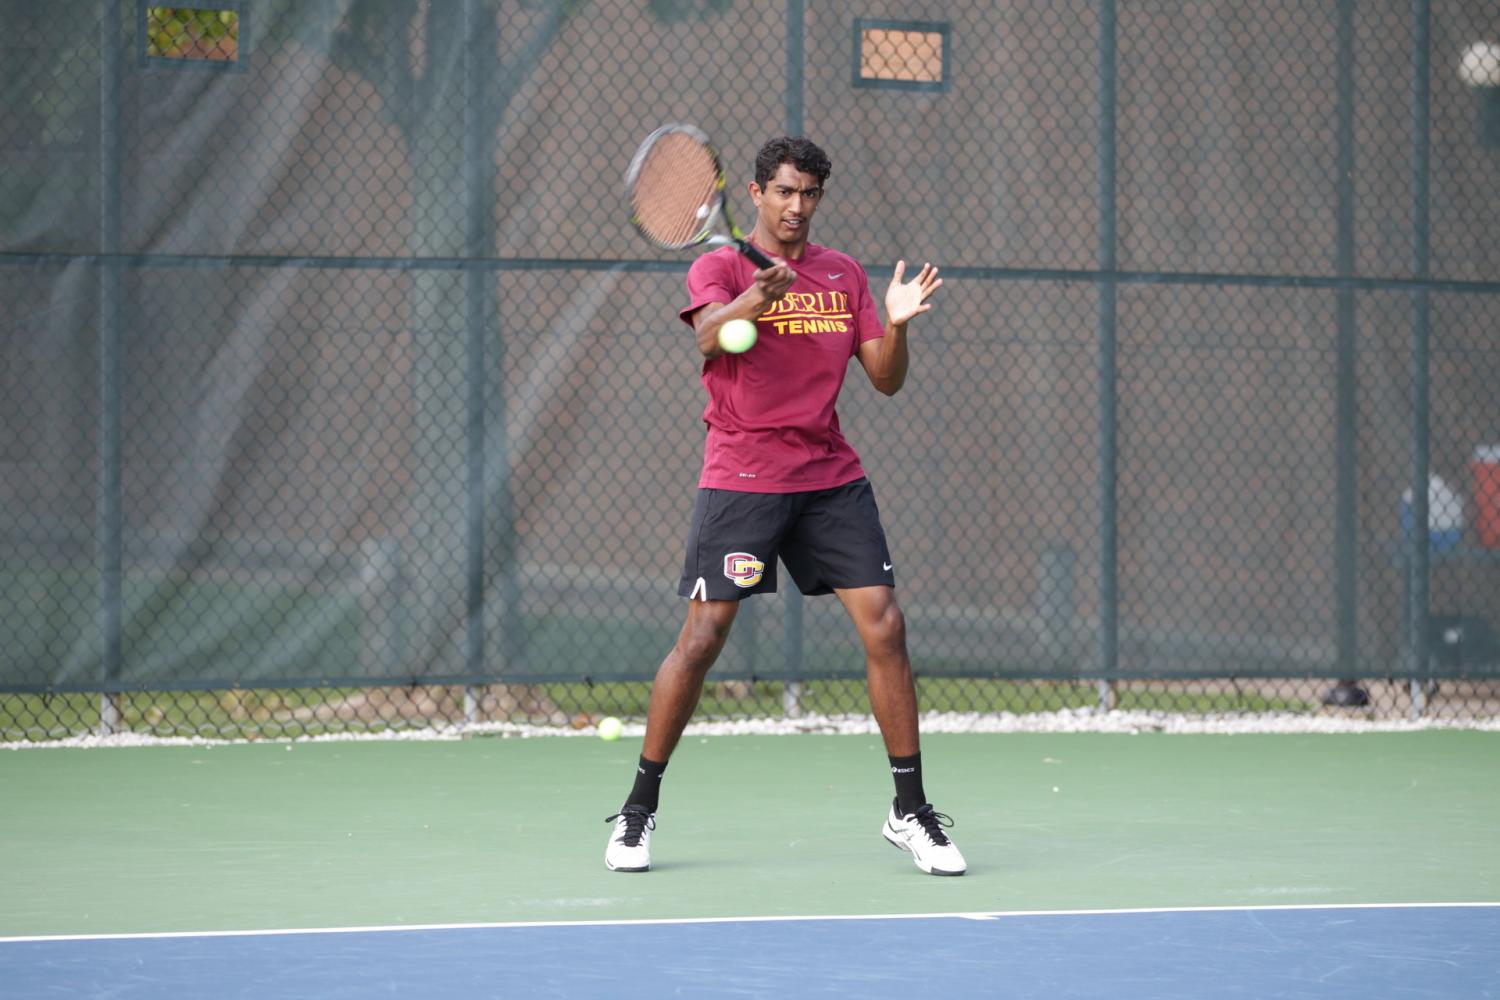 Junior+Manickam+Manickam+completes+a+forehand+follow-through.+The+Yeomen+completed+their+season+with+a+5%E2%80%932+victory+over+Denison+University+in+the+third-place+match+of+the+NCAC+Tournament.